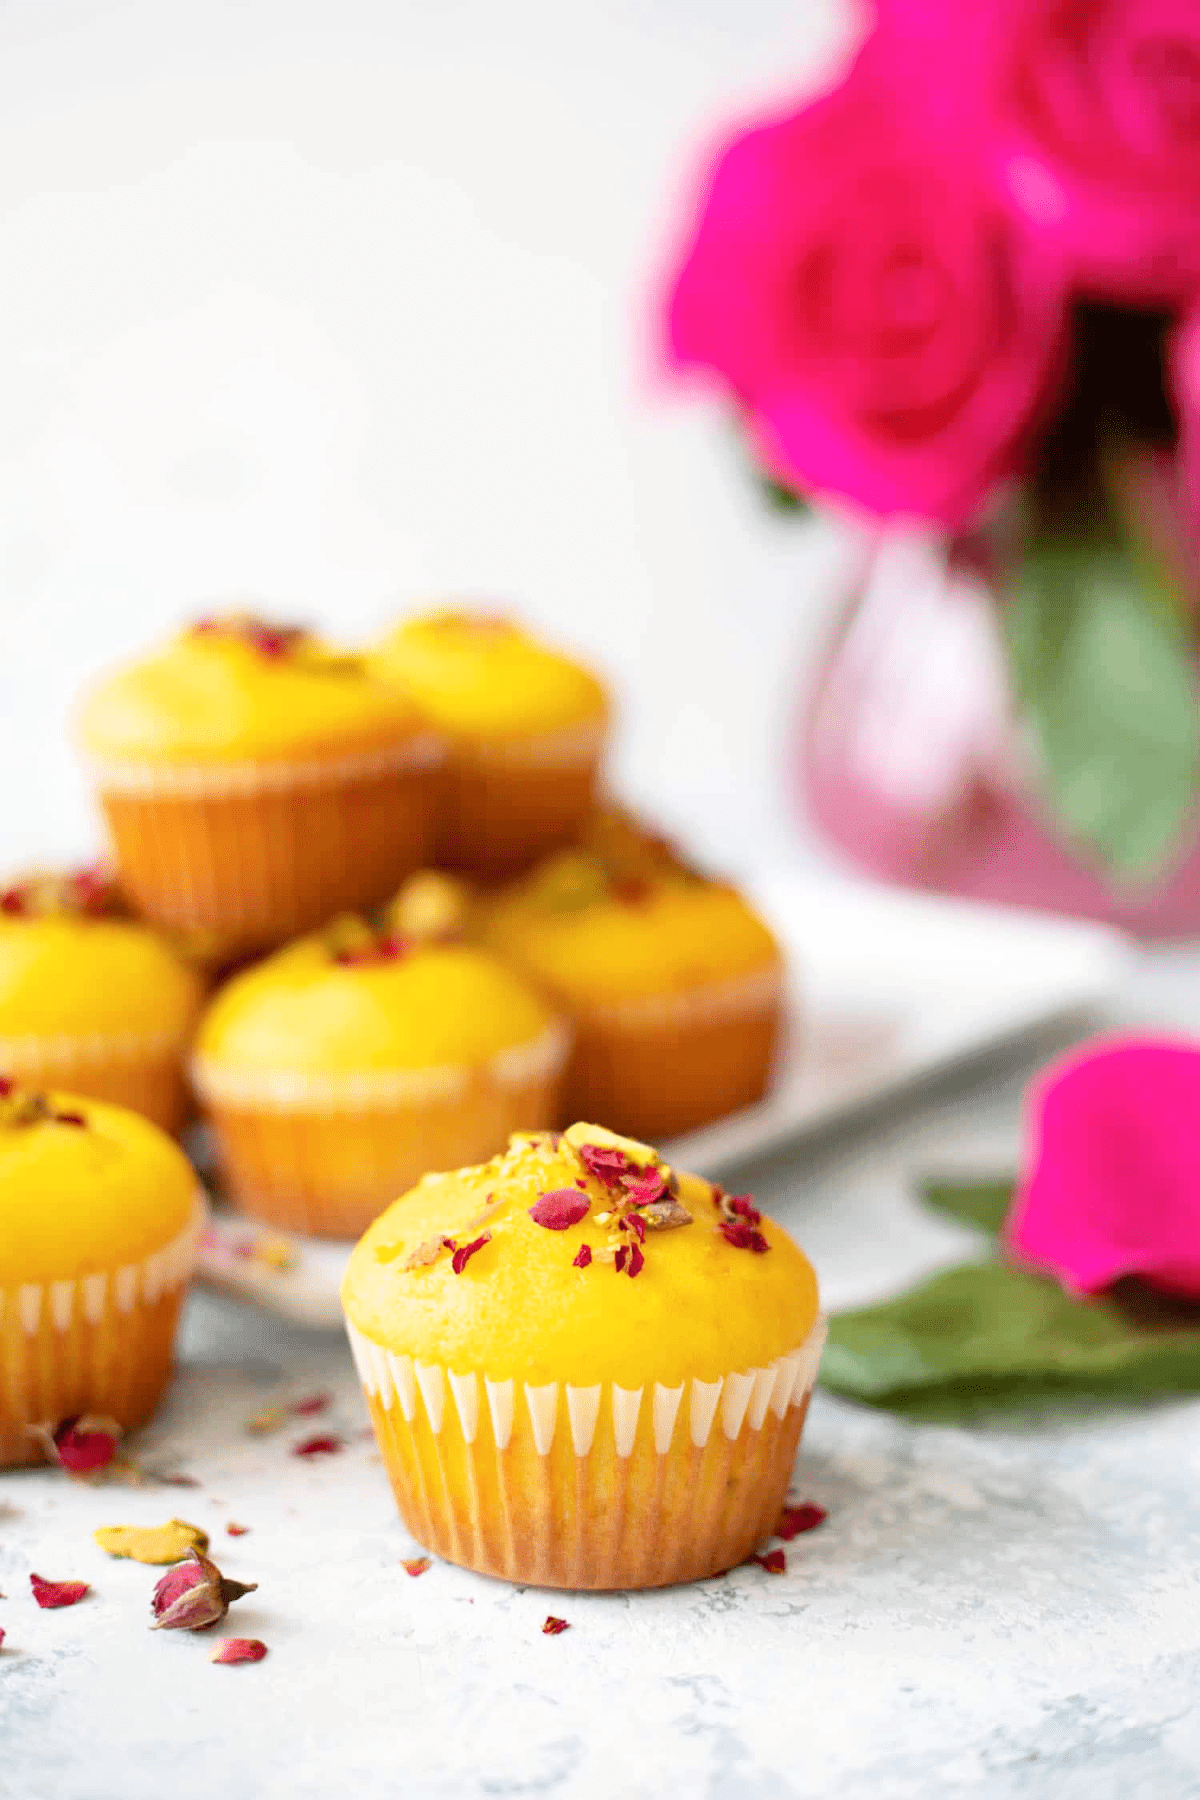 Saffron and rosewater are a delightful combination in these Persian love muffins. They're soft, delicious, and have a truly unique flavor.
